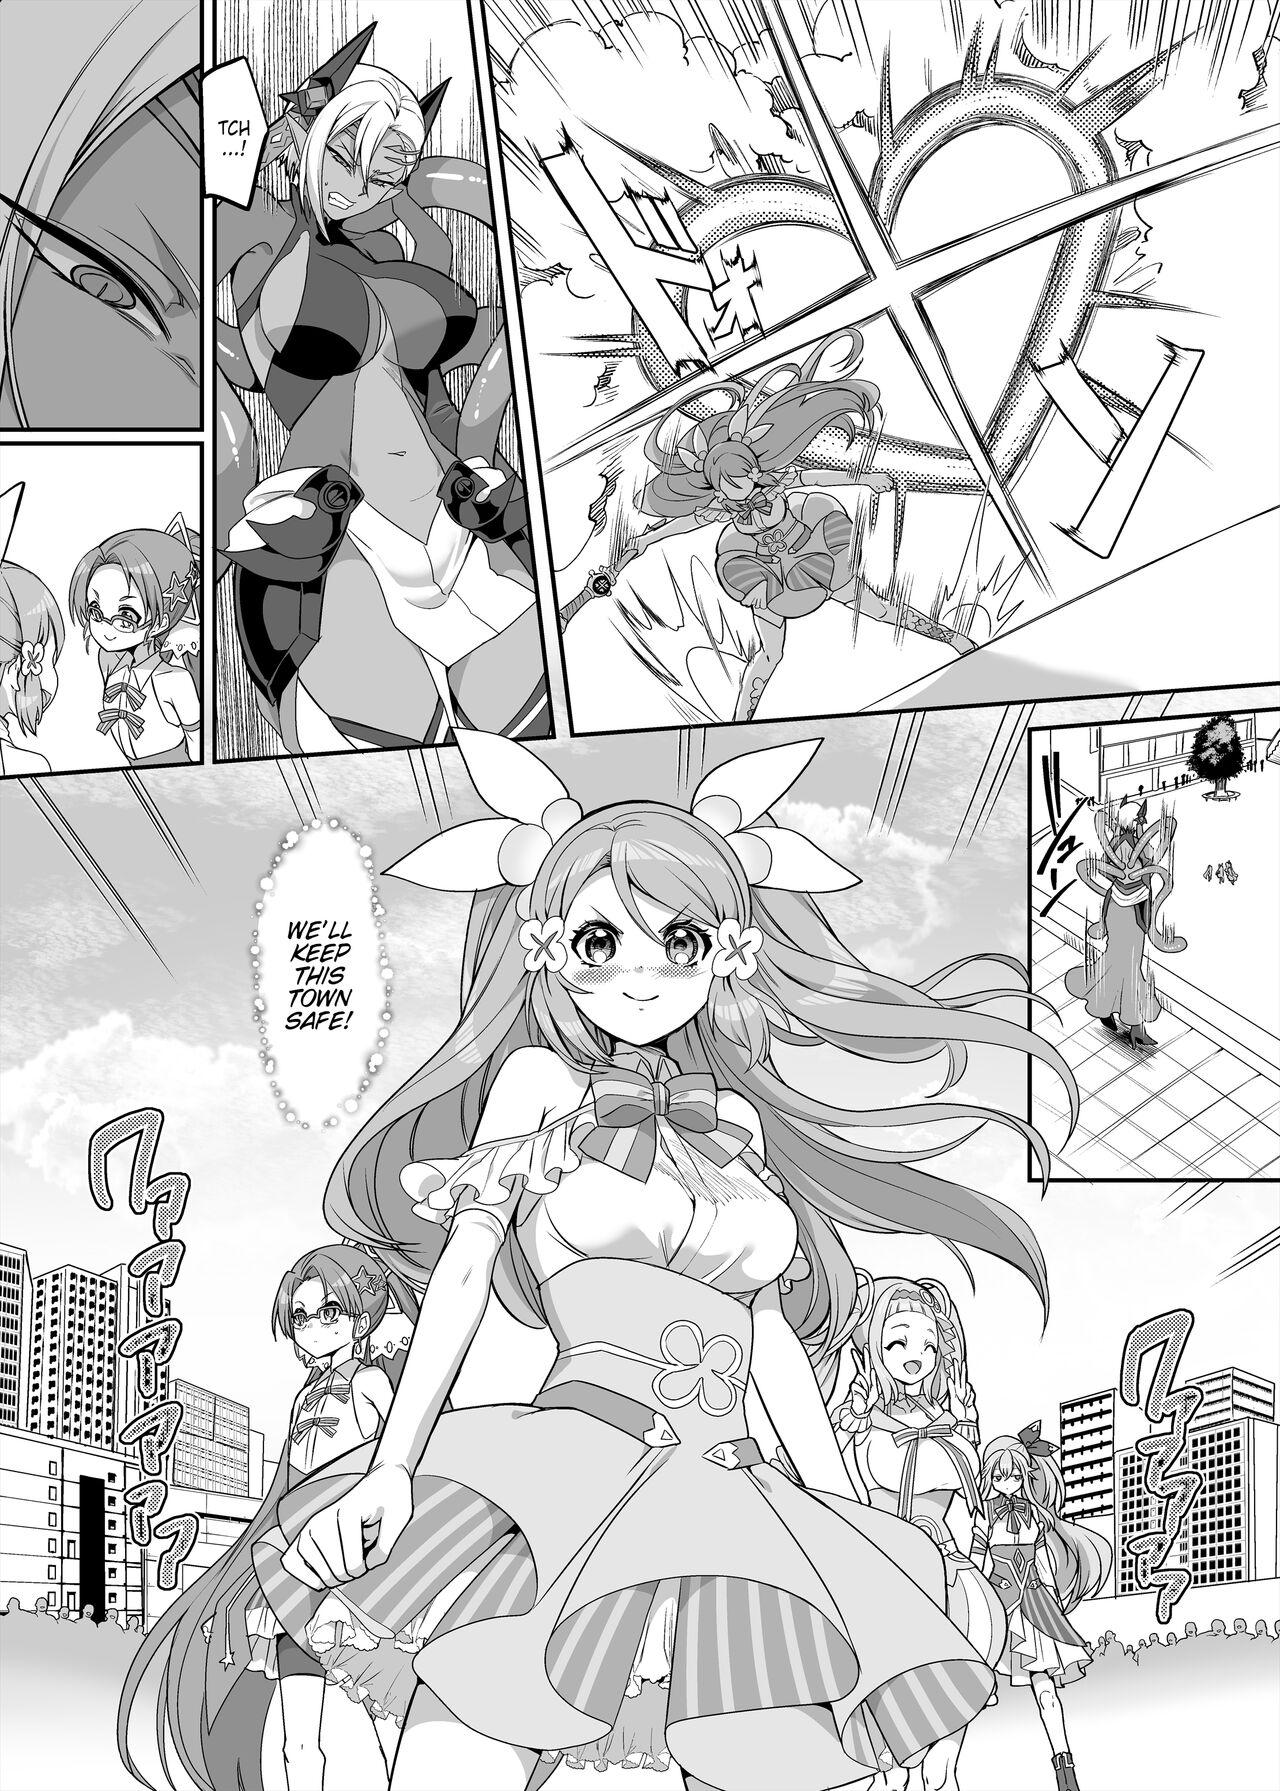 Mask Henshin Heroine Team no Zunouha de Majime de Hinnyuu no Blue | The Smart, Diligent and Flat-Chested Blue from the Team of Morphing Heroines - Original Nudity - Page 3